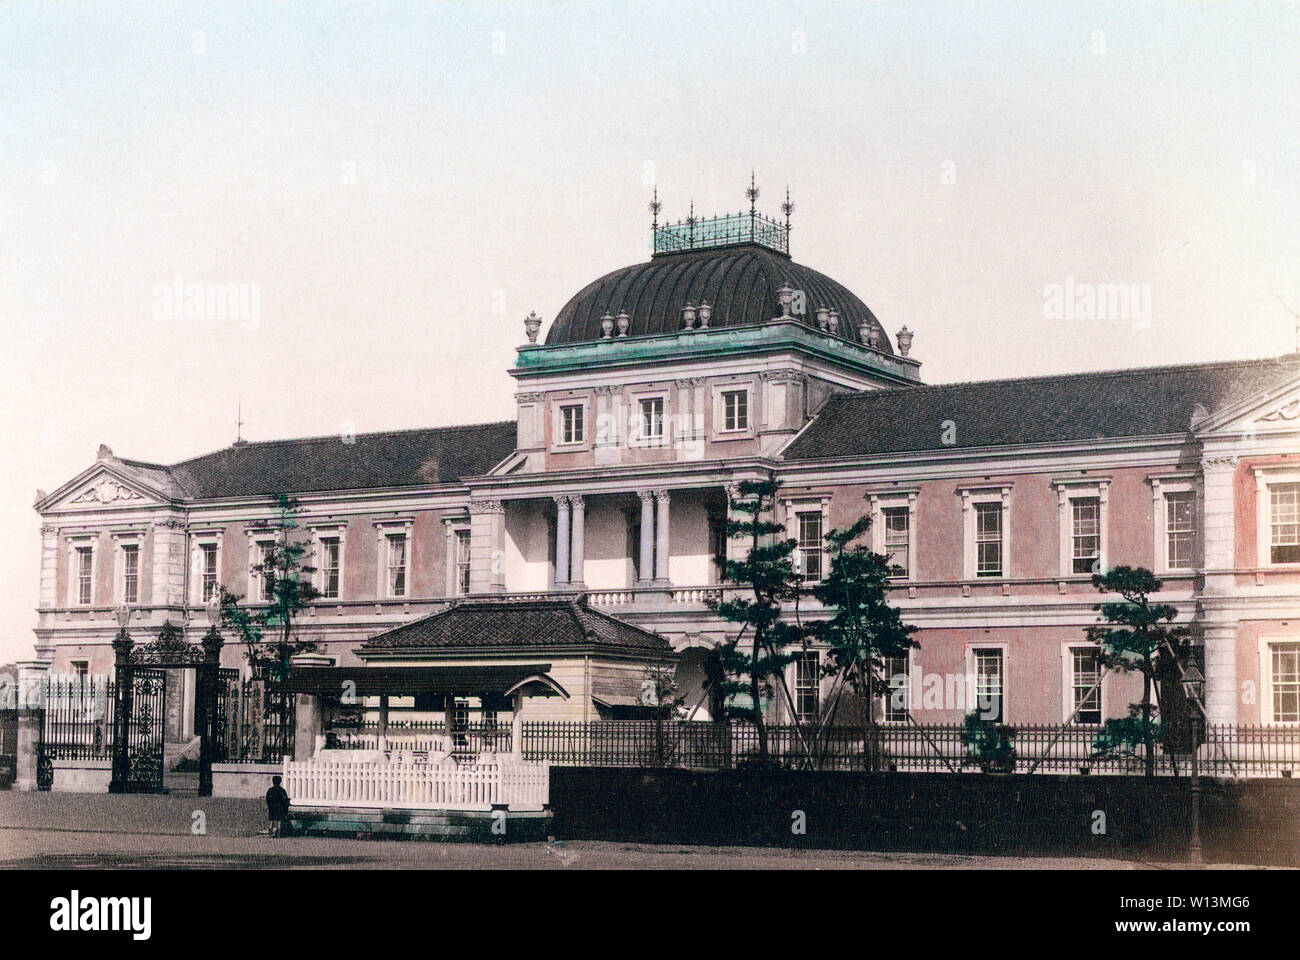 [ 1890s Japan - Yokohama District Court ] —   Yokohama District Court (Yokohama Chiho Saibansho) in Yokohama, Kanagawa, Japan. The building was designed by Japanese architect Tatsuno Kingo (1854–1919) and completed in 1890 (Meiji 23). It was located on Kitanakadori 5-chome, a location now used for other government buildings.  The building was destroyed by the Great Kanto Earthquake in 1923 (Taisho 12), after which the district court moved to its current location.  19th century vintage albumen photograph. Stock Photo